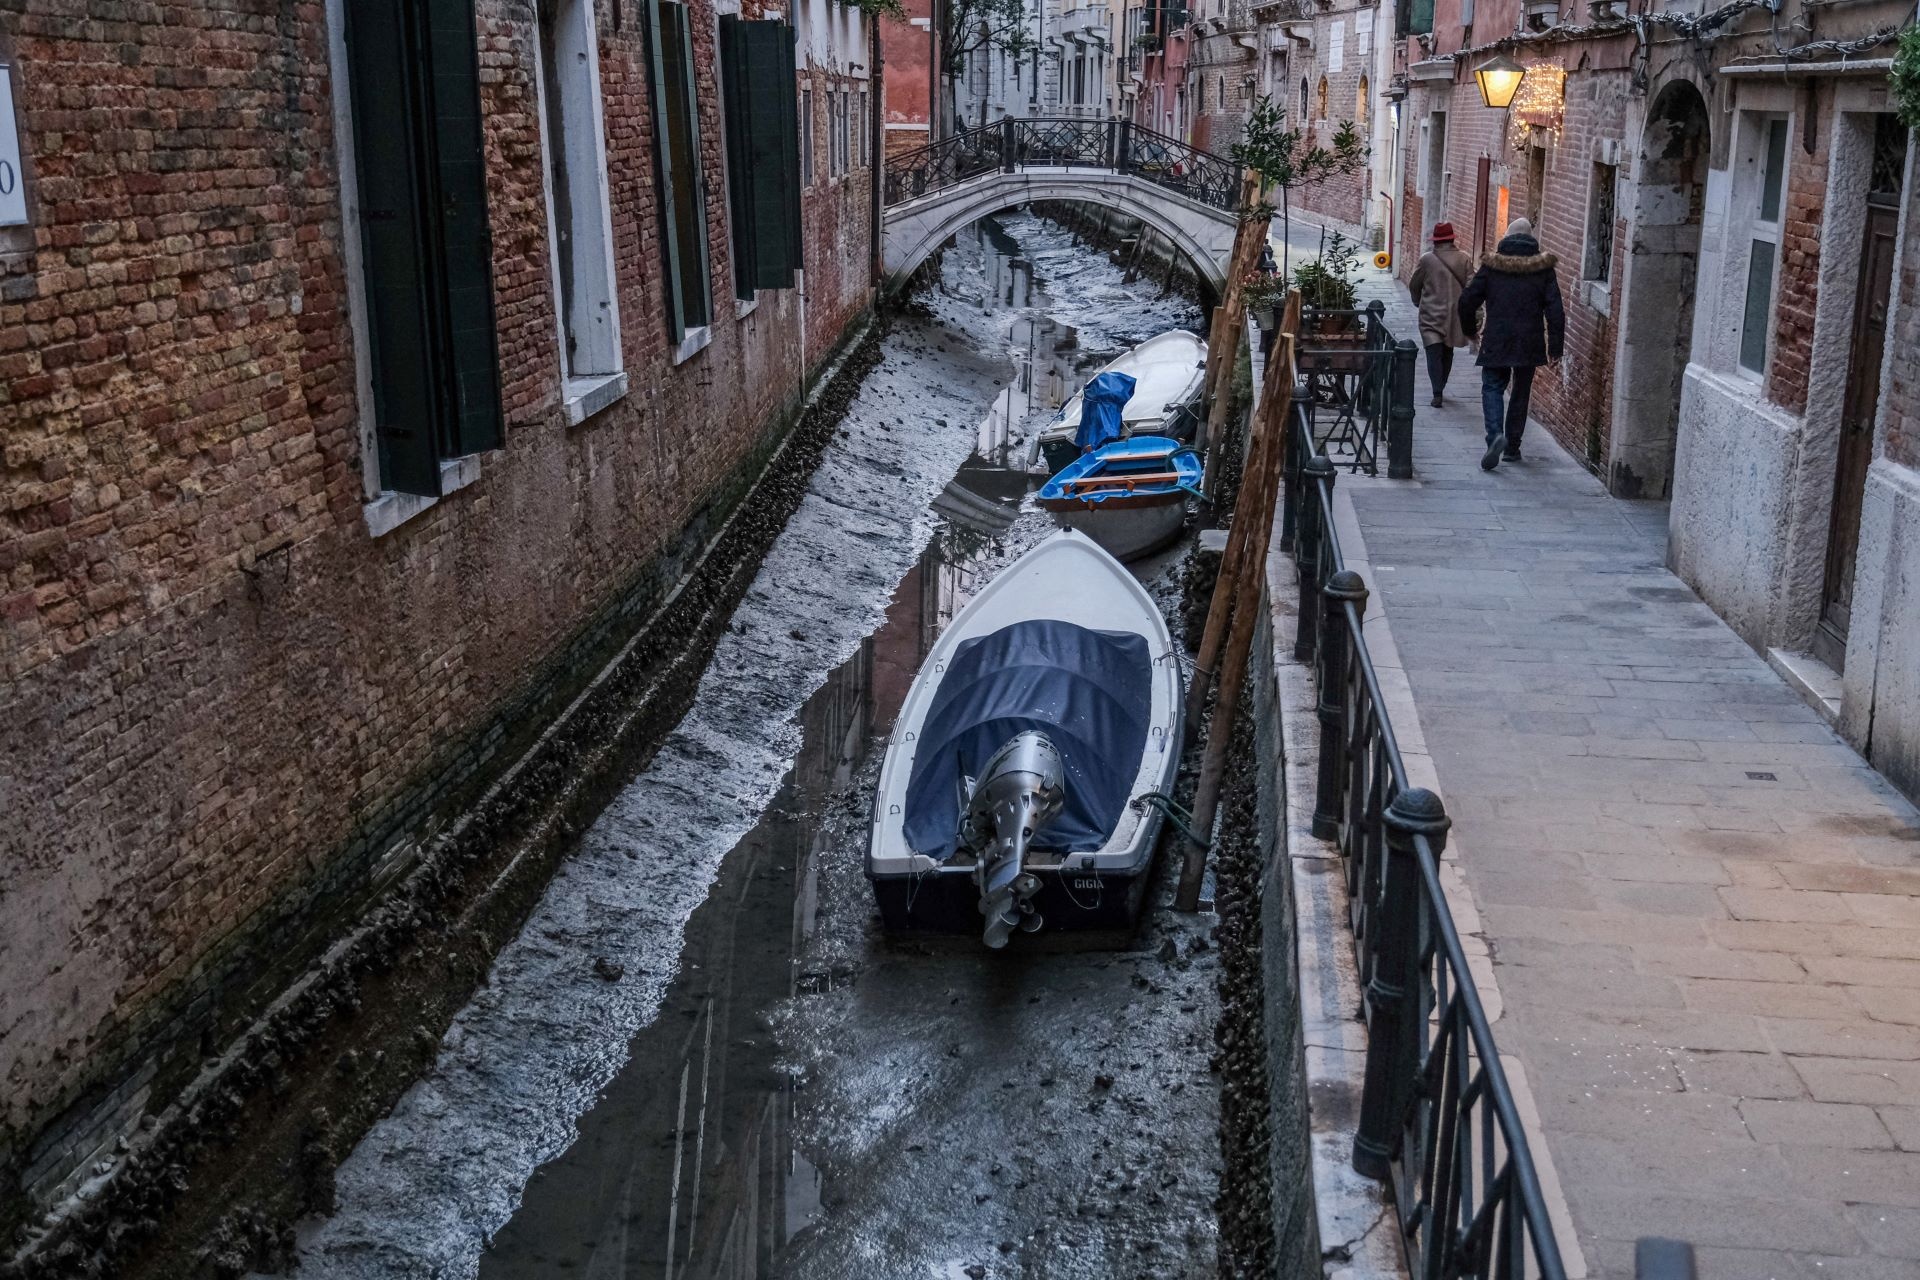 Venice's iconic canals are experiencing an 'extreme' change